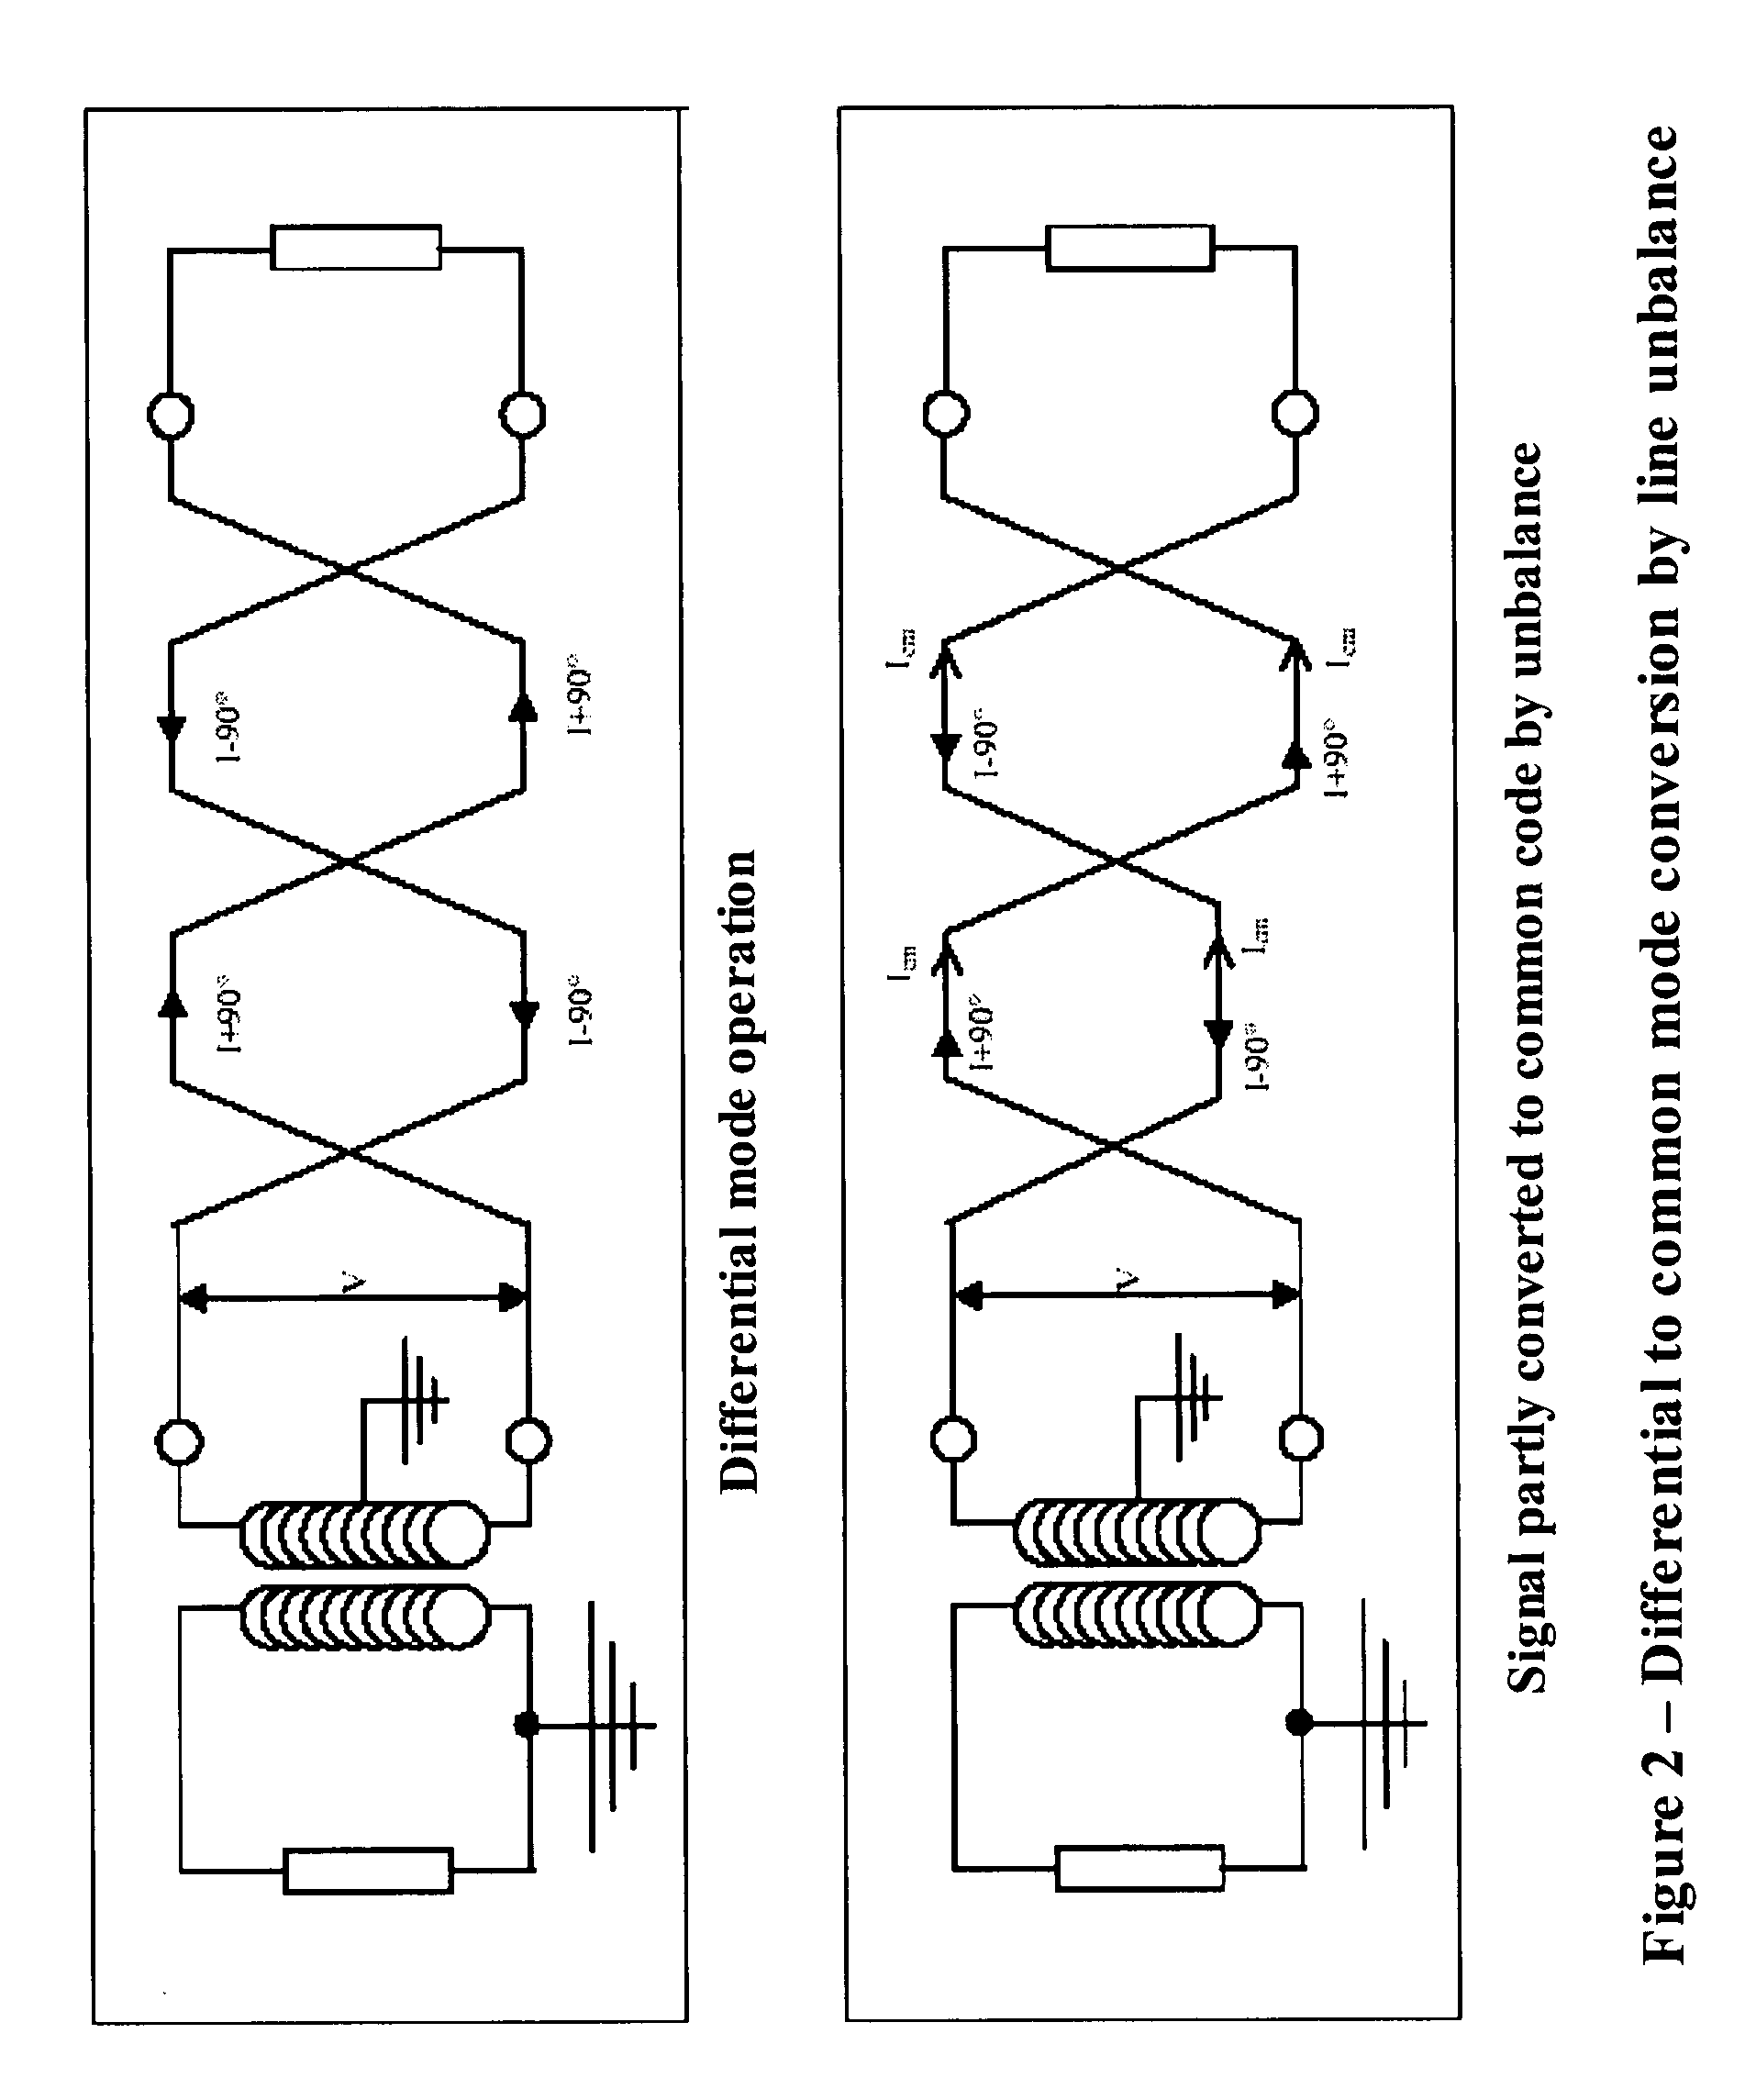 Reduction of noise in a metallic conductor signal pair using controlled line balancing and common mode impedance reduction